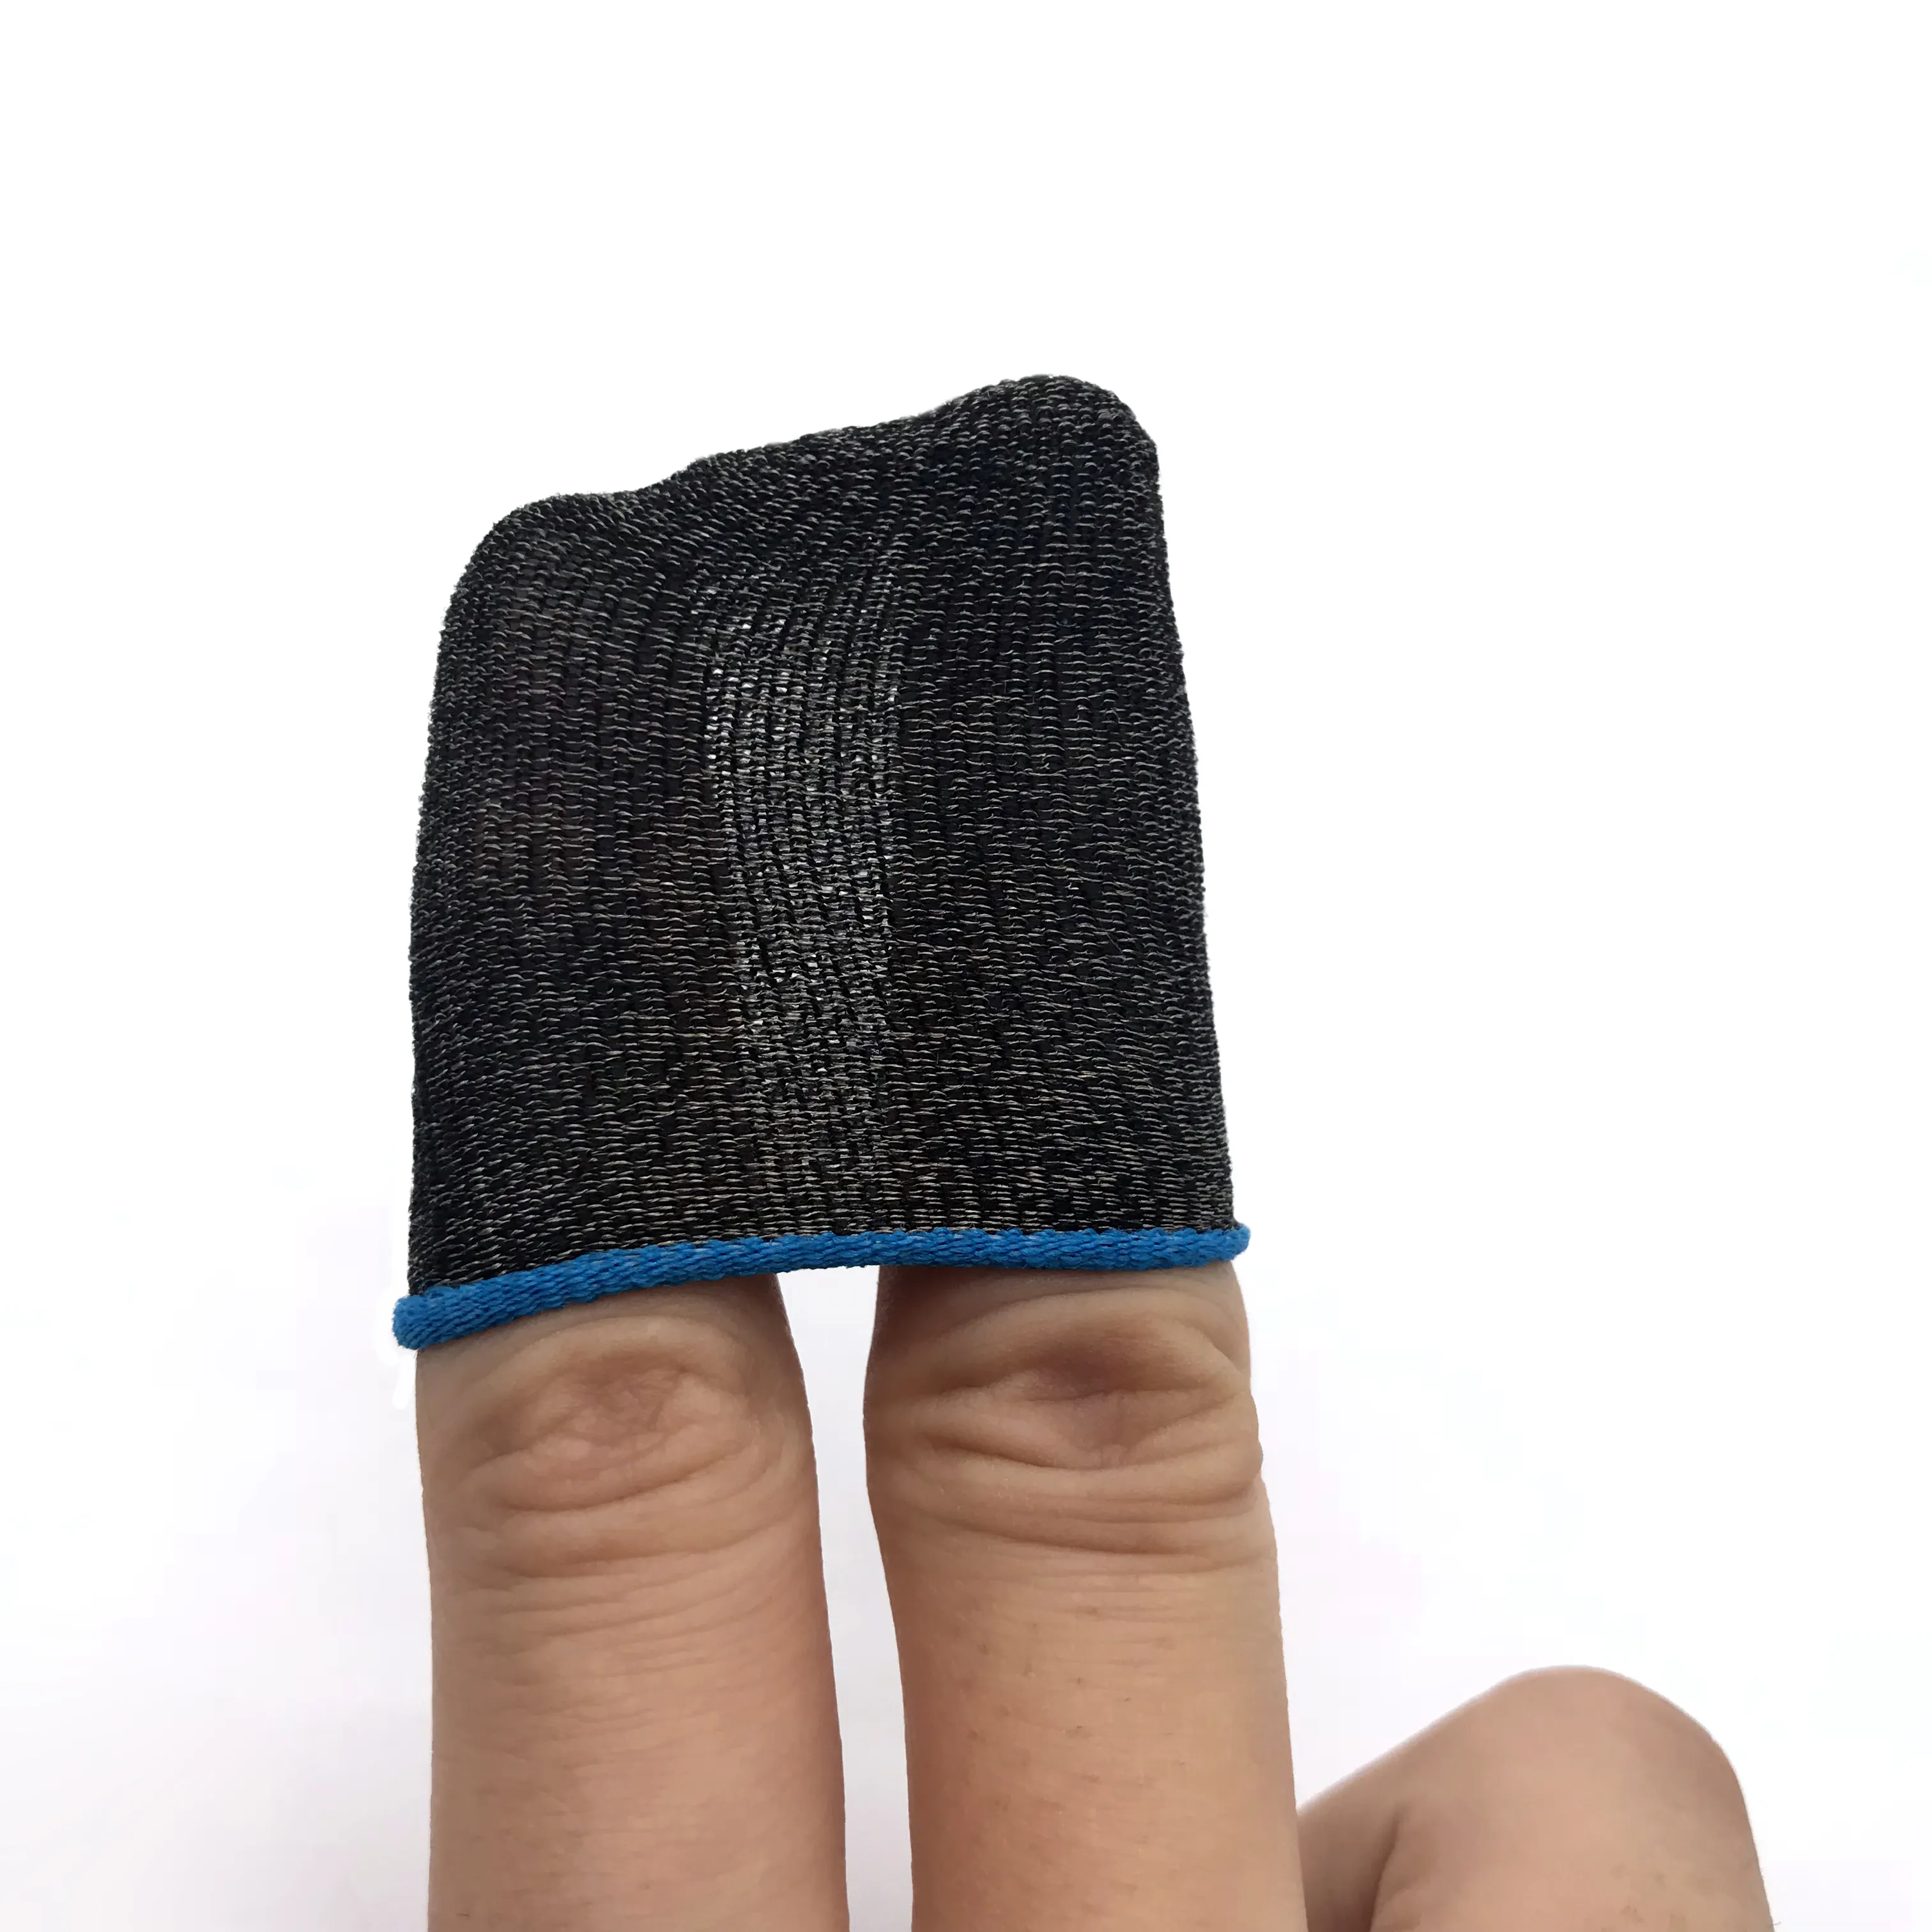 Top-rated Mobile Game Finger Sleeve Finger Cots Anti-slip Conductive Finger Cots For PUBG